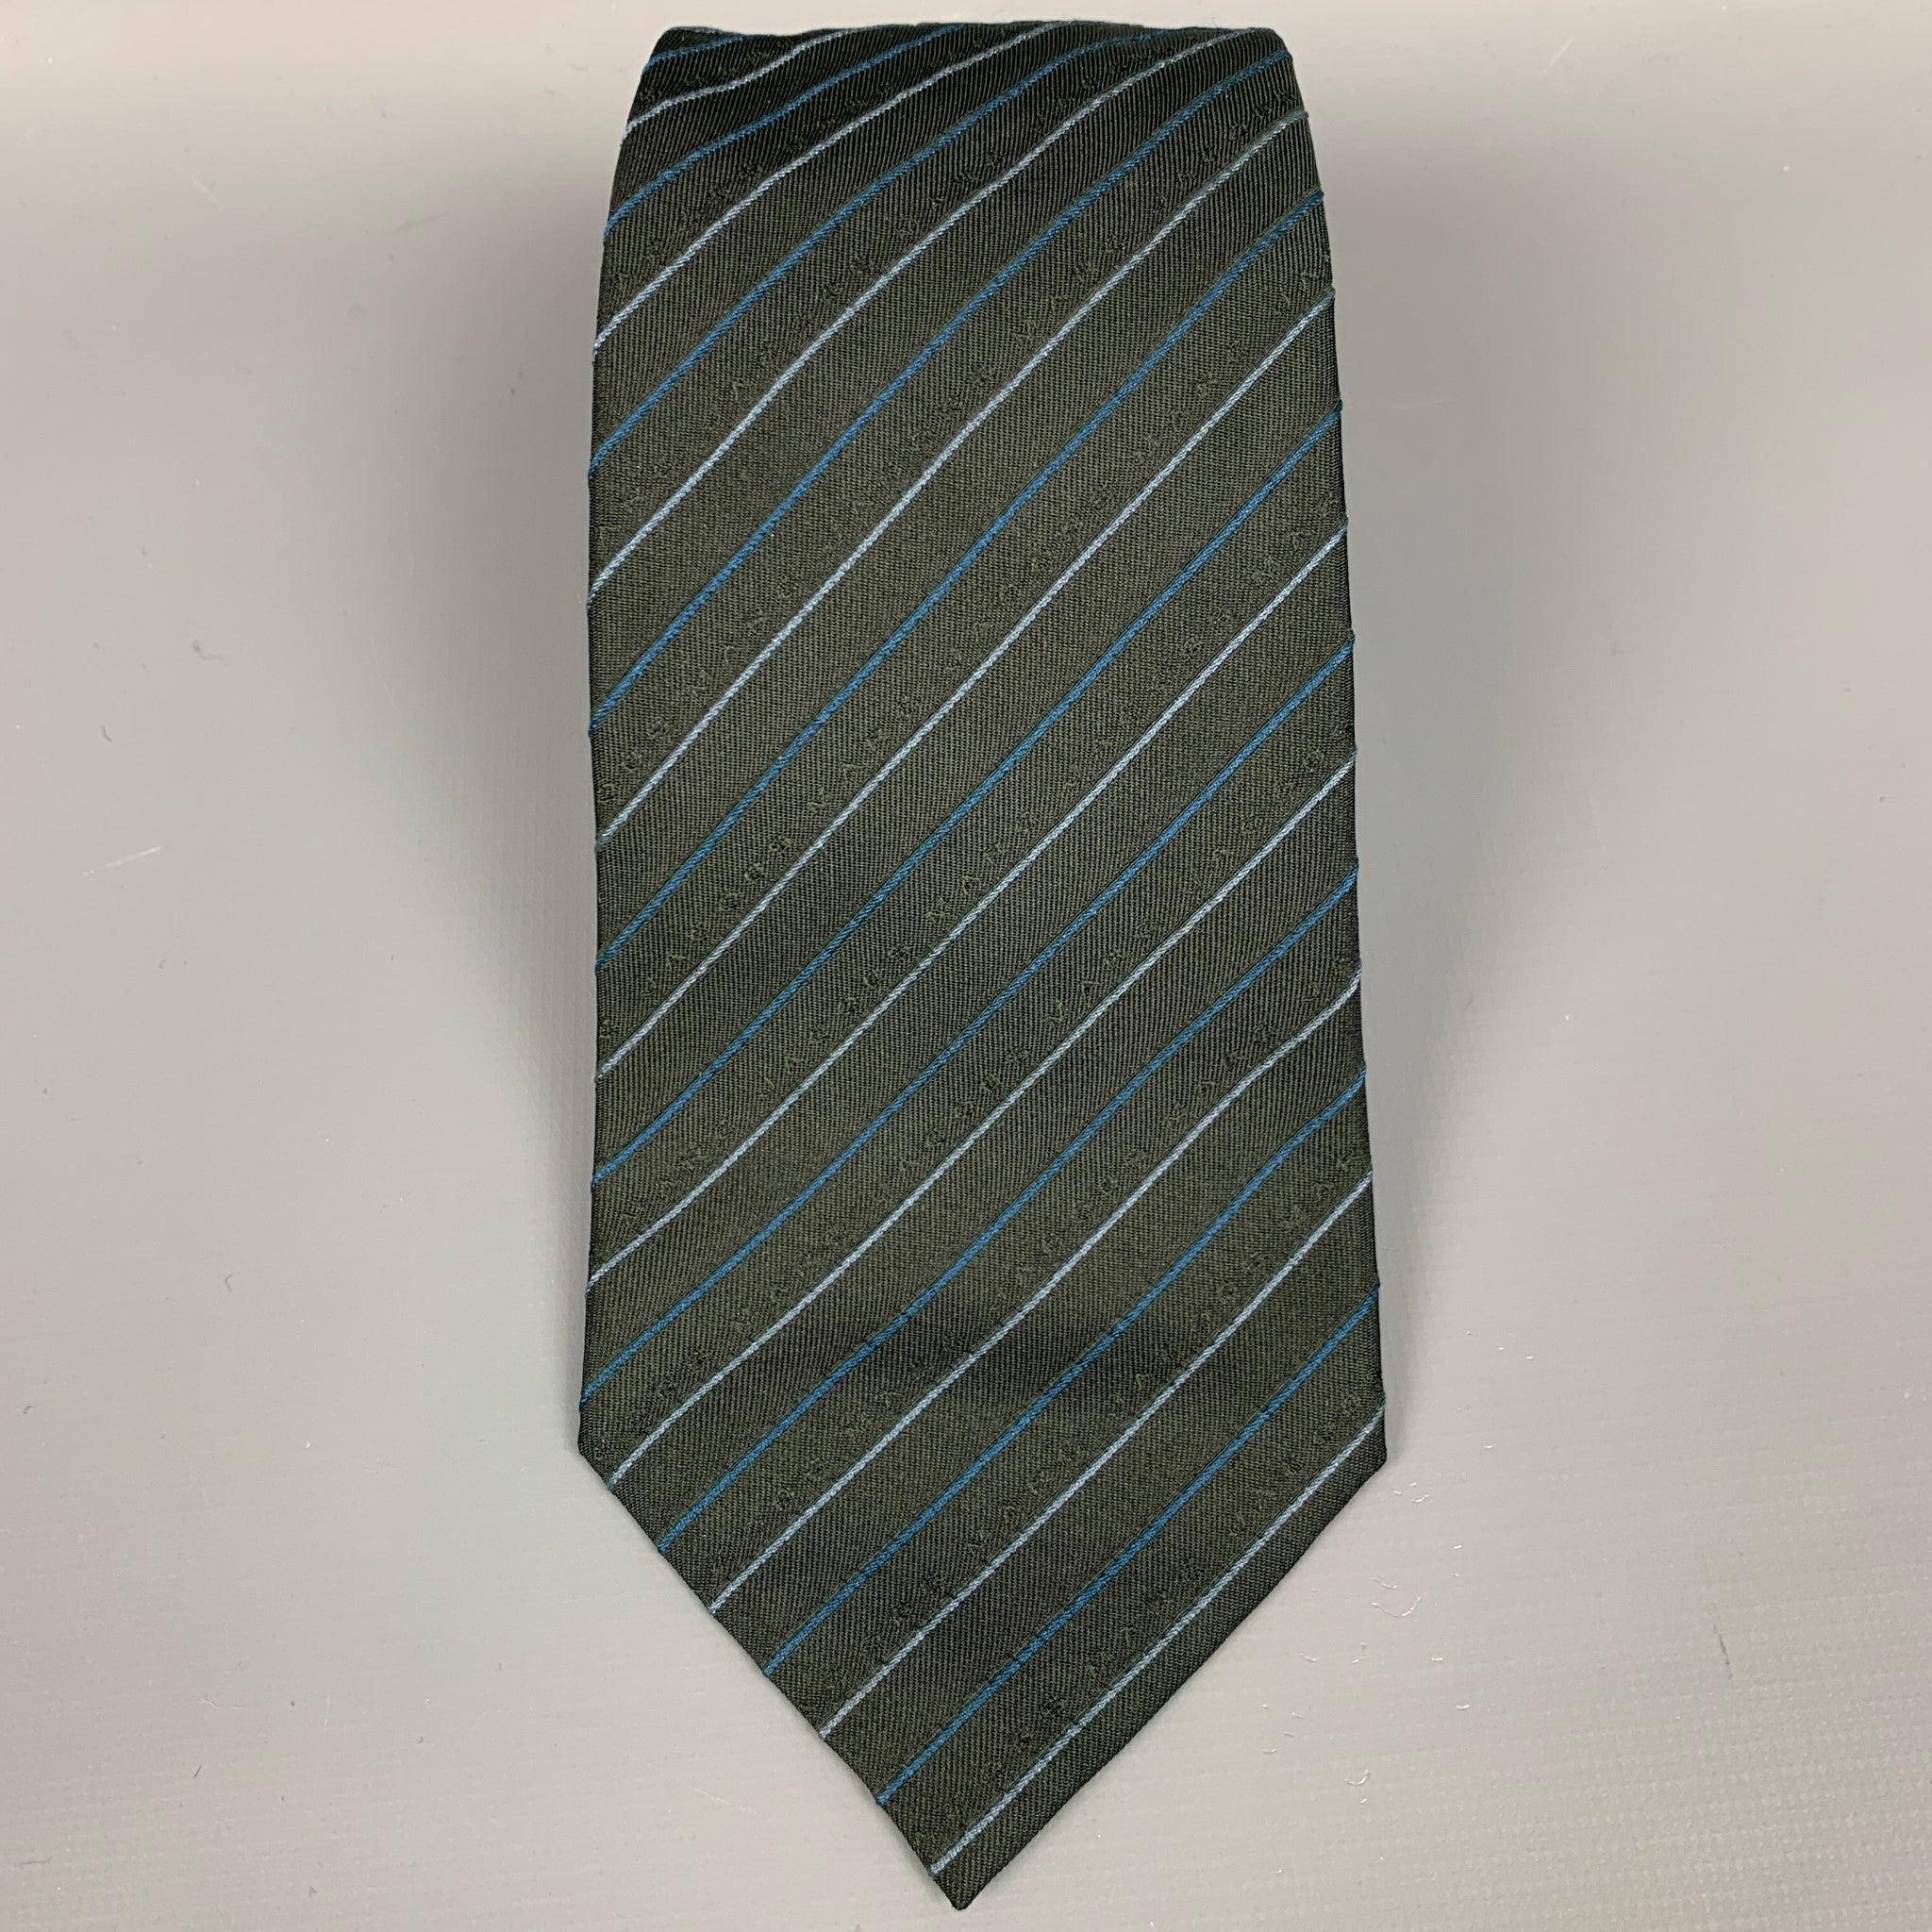 MARC JACOBS neck tie comes in a olive & charcoal diagonal stripe silk. Very Good Pre-Owned Condition.  
 

 Measurements: 
  Width: 3.5 inches  
  
  
  
 Sui Generis Reference: 33335
 Category: Tie
 More Details
  
 Brand: MARC JACOBS
 Color: